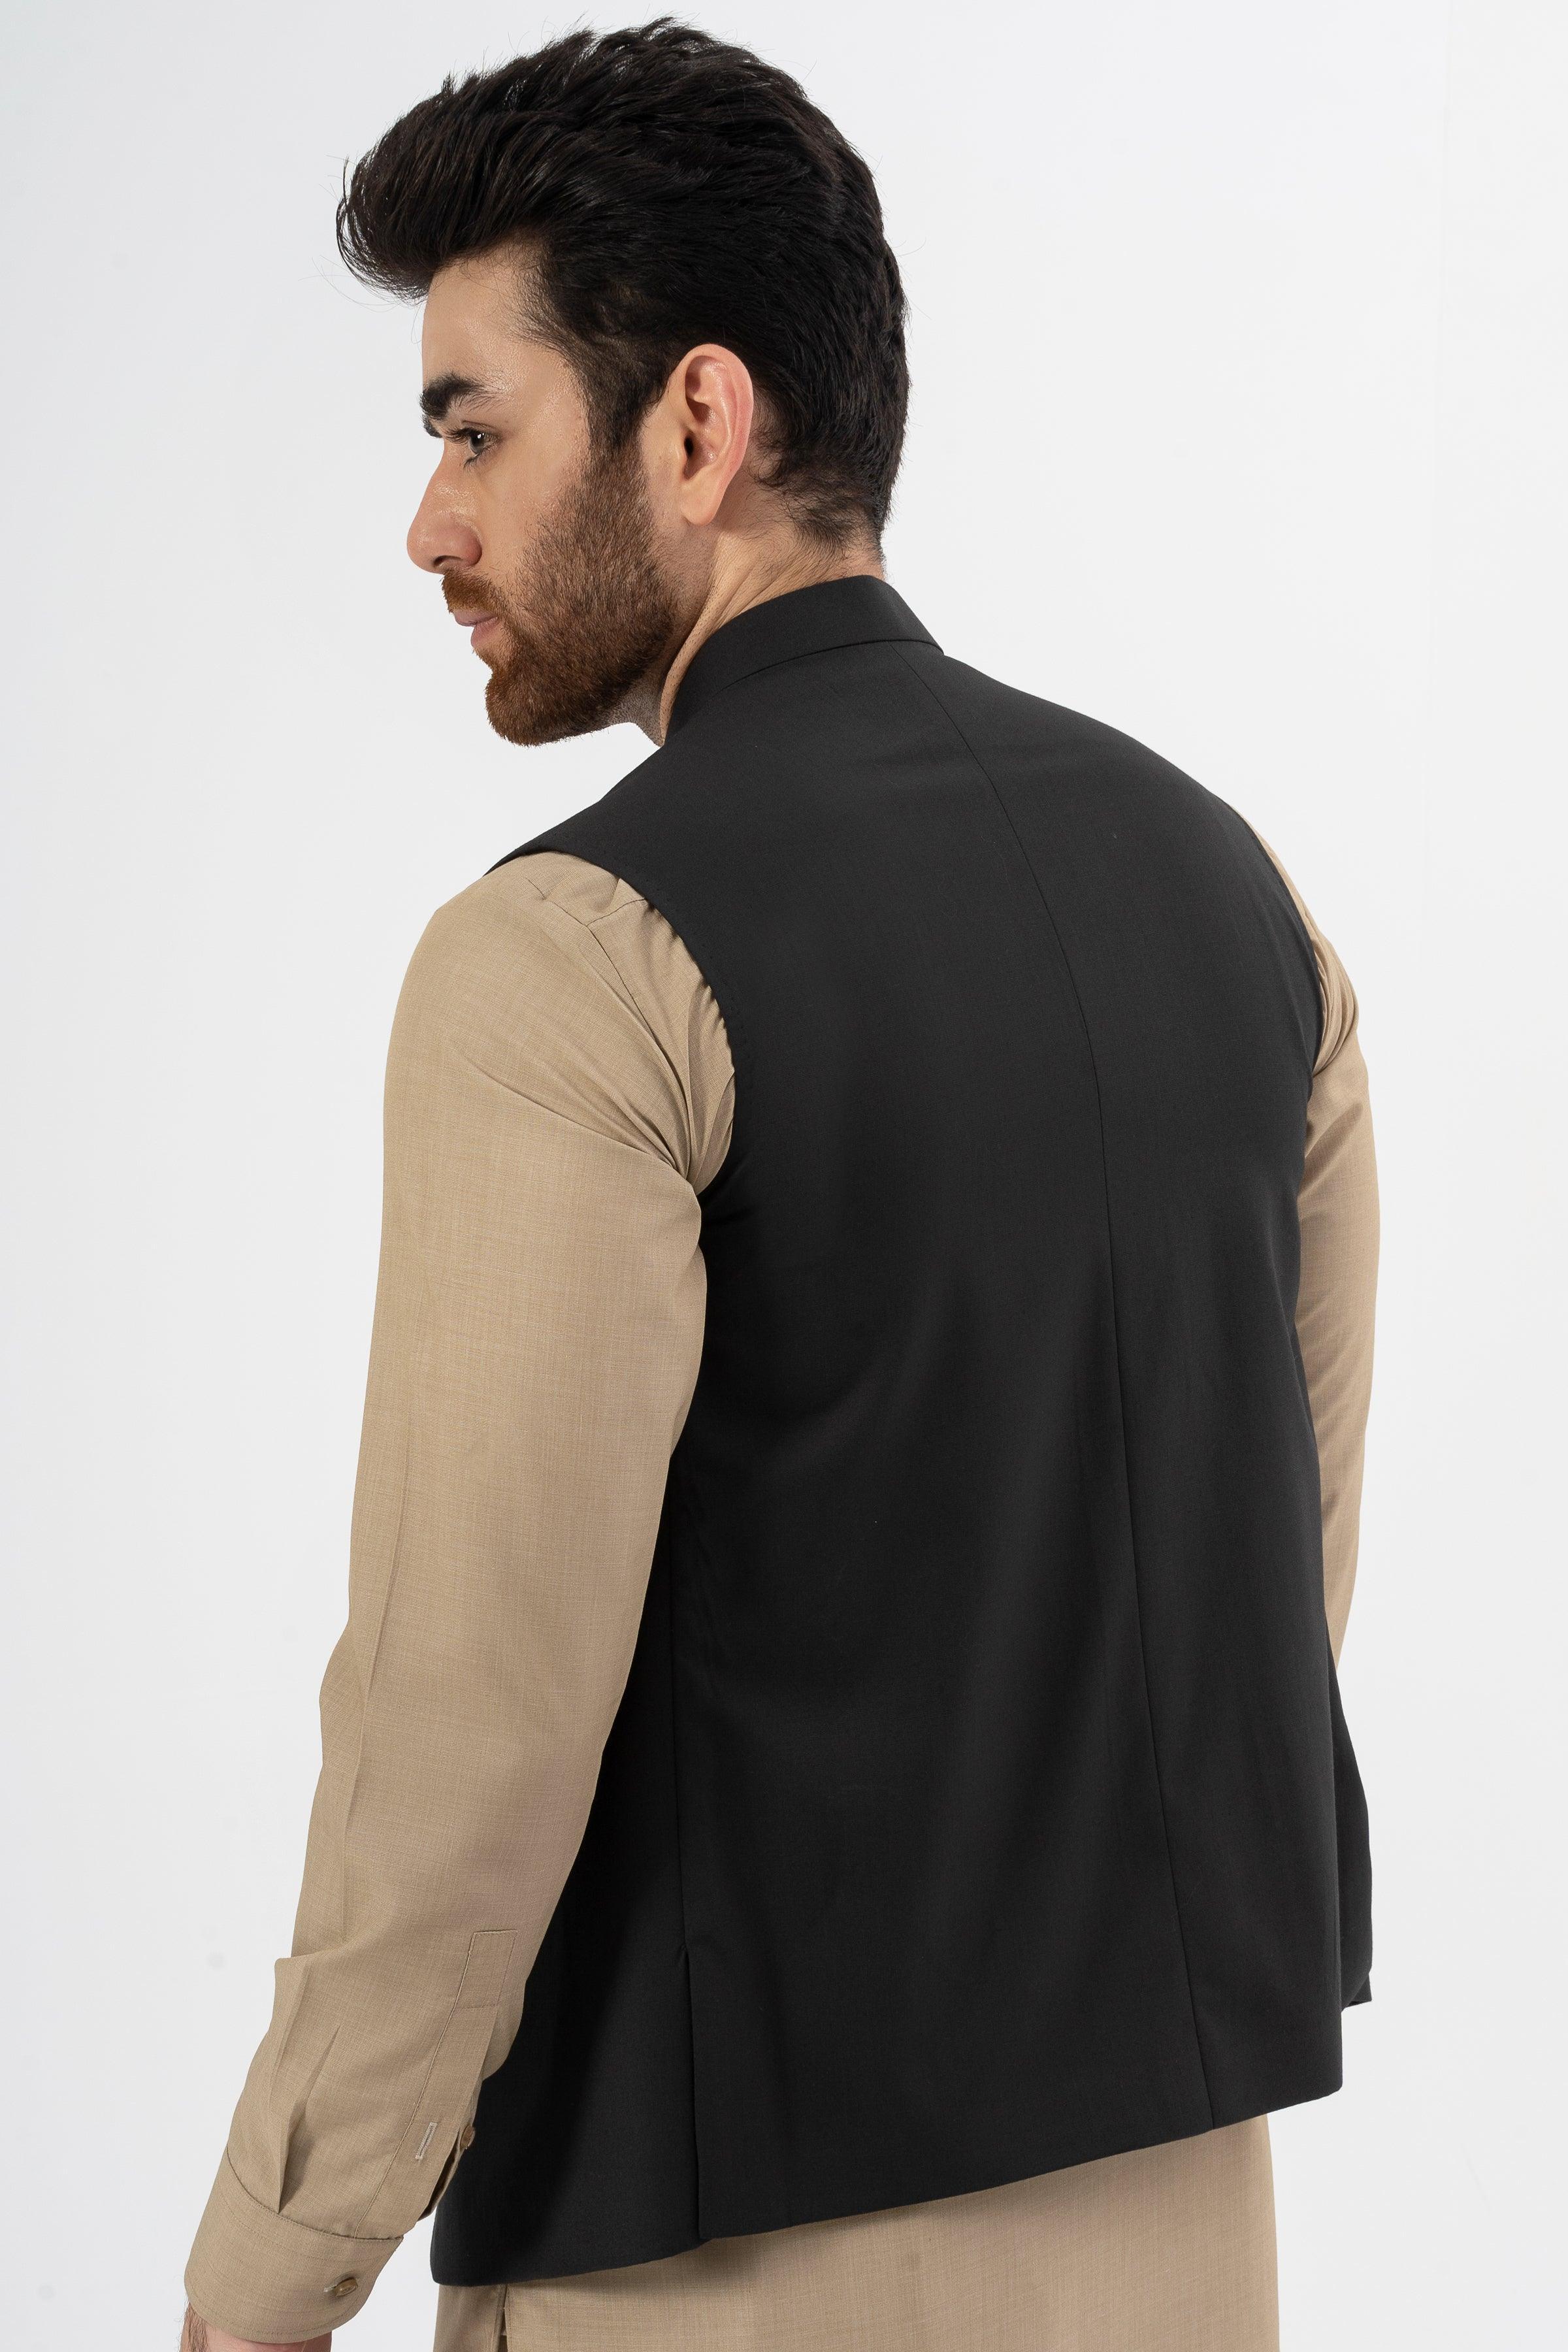 EXCLUSIVE TEXTURED WAISTCOAT BLACK at Charcoal Clothing